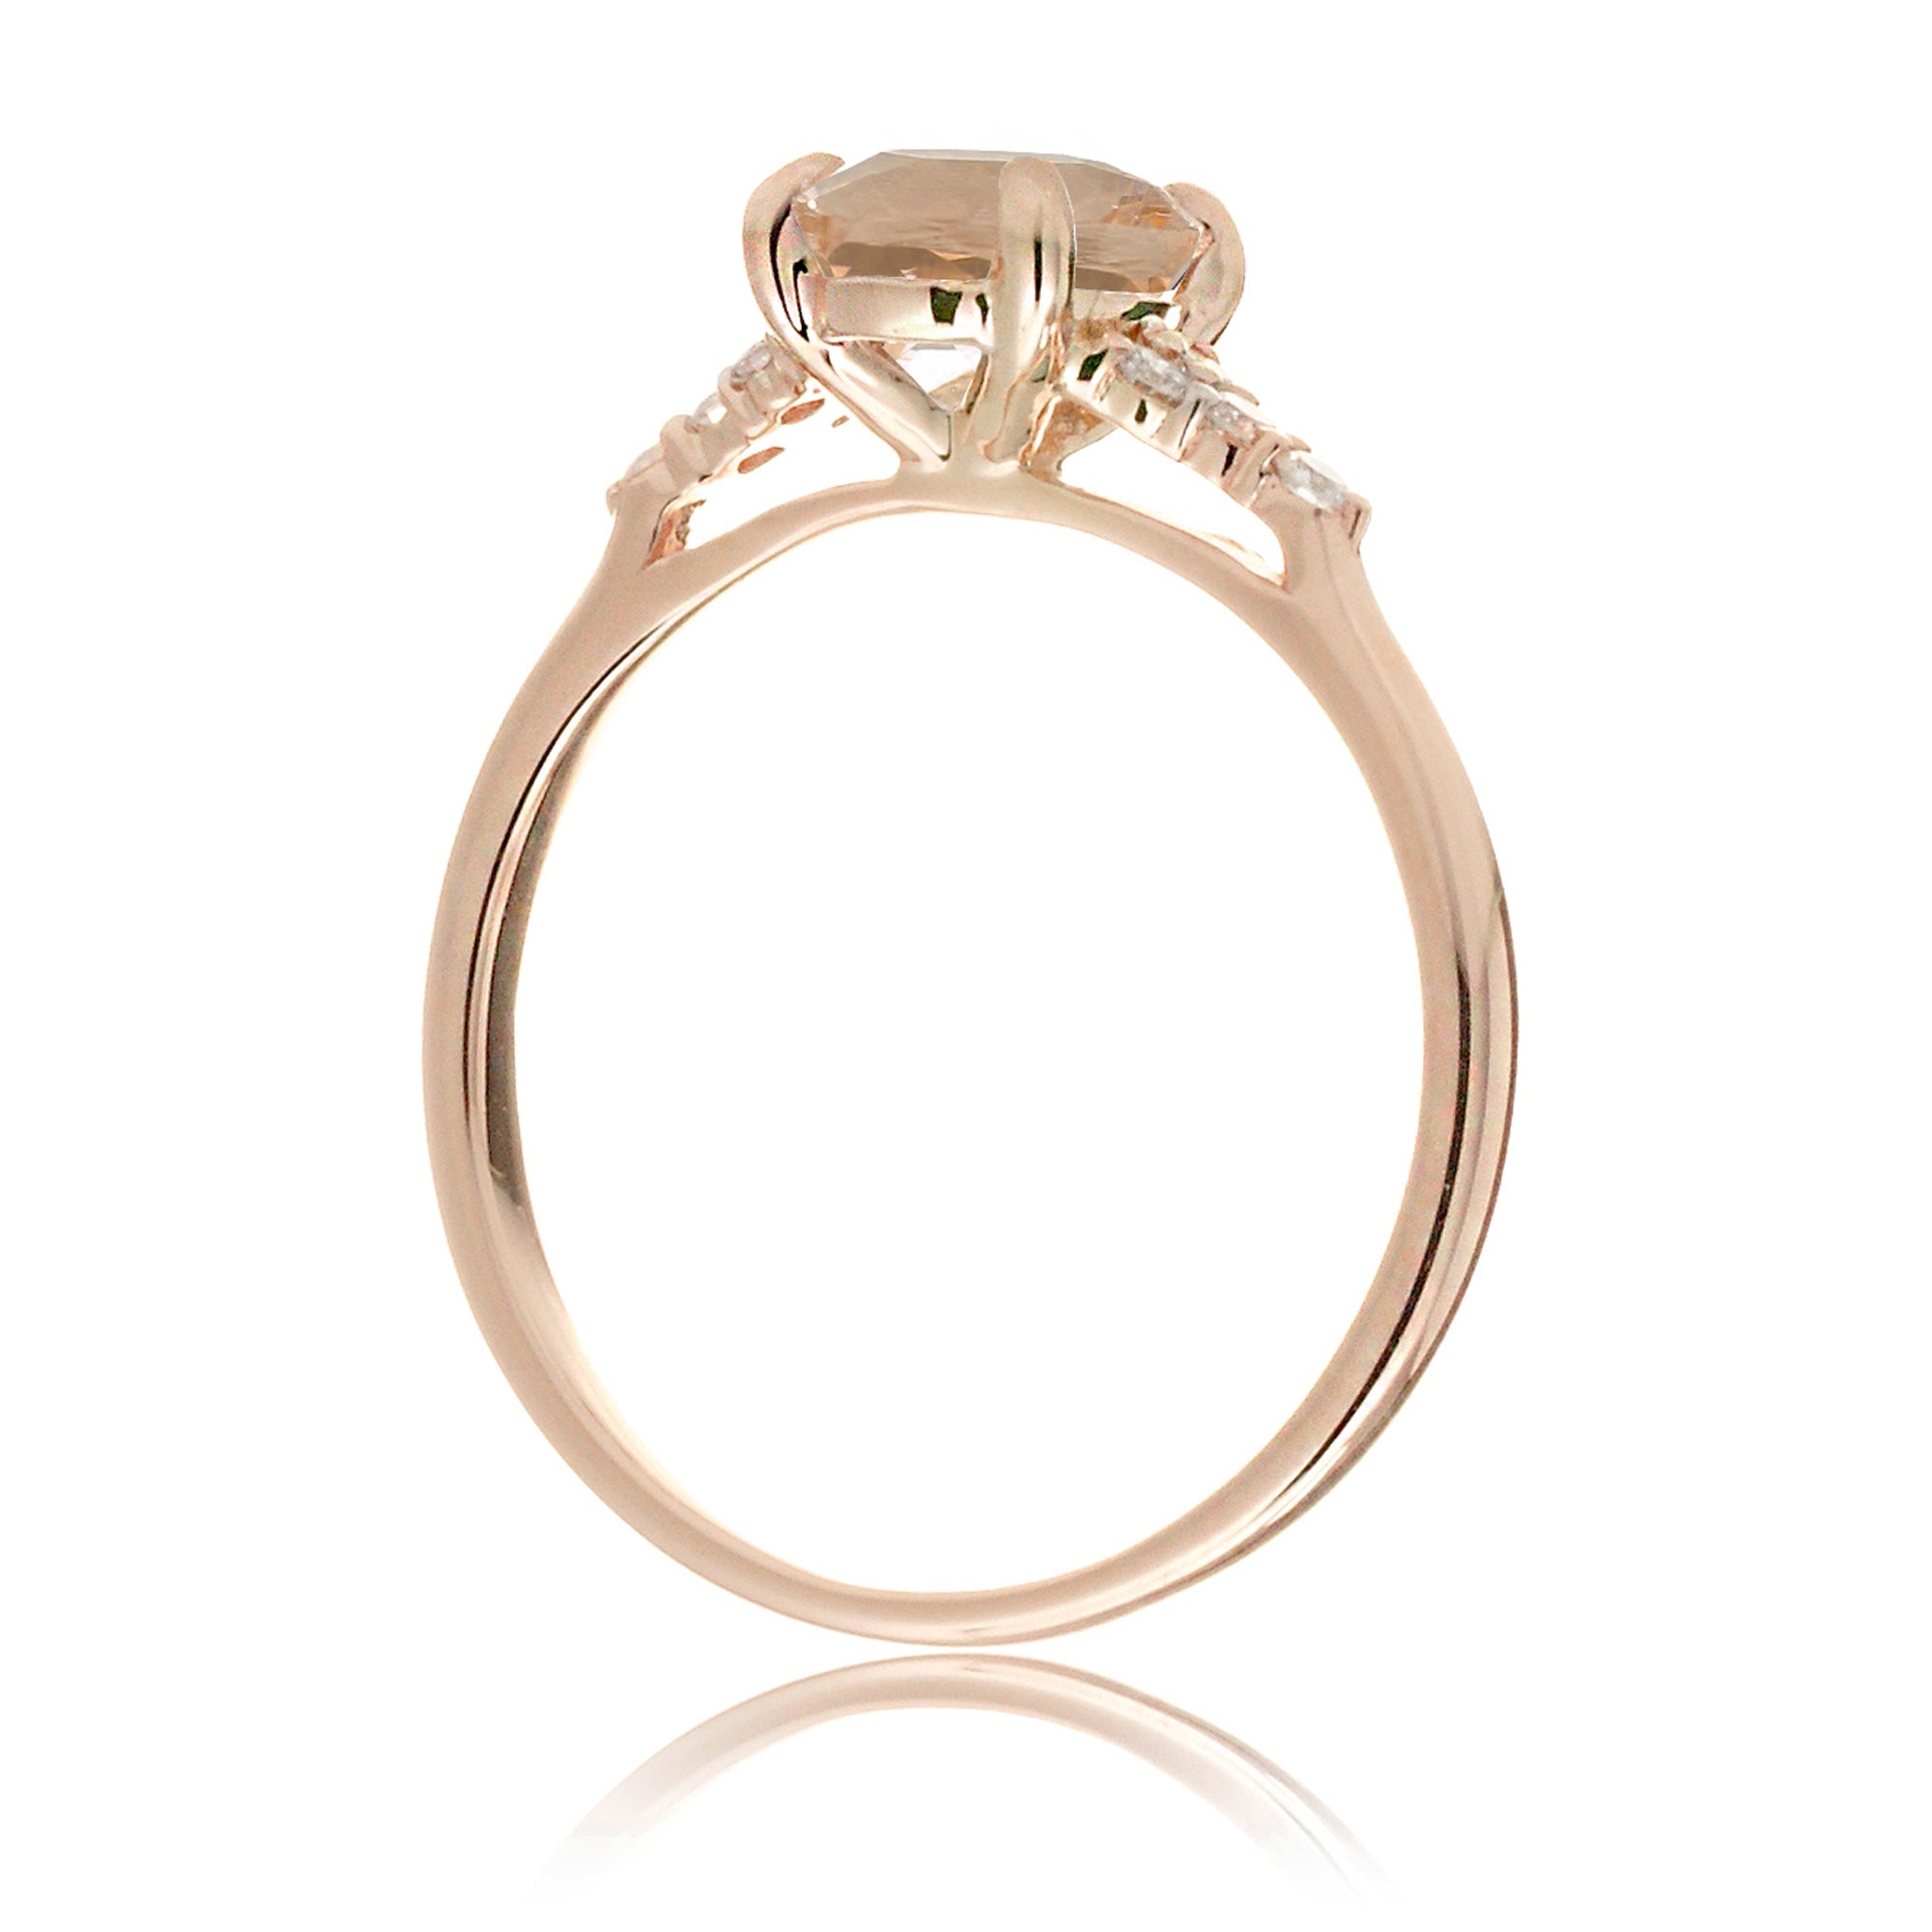 Cushion morganite ring with solid band and diamond accent in rose gold